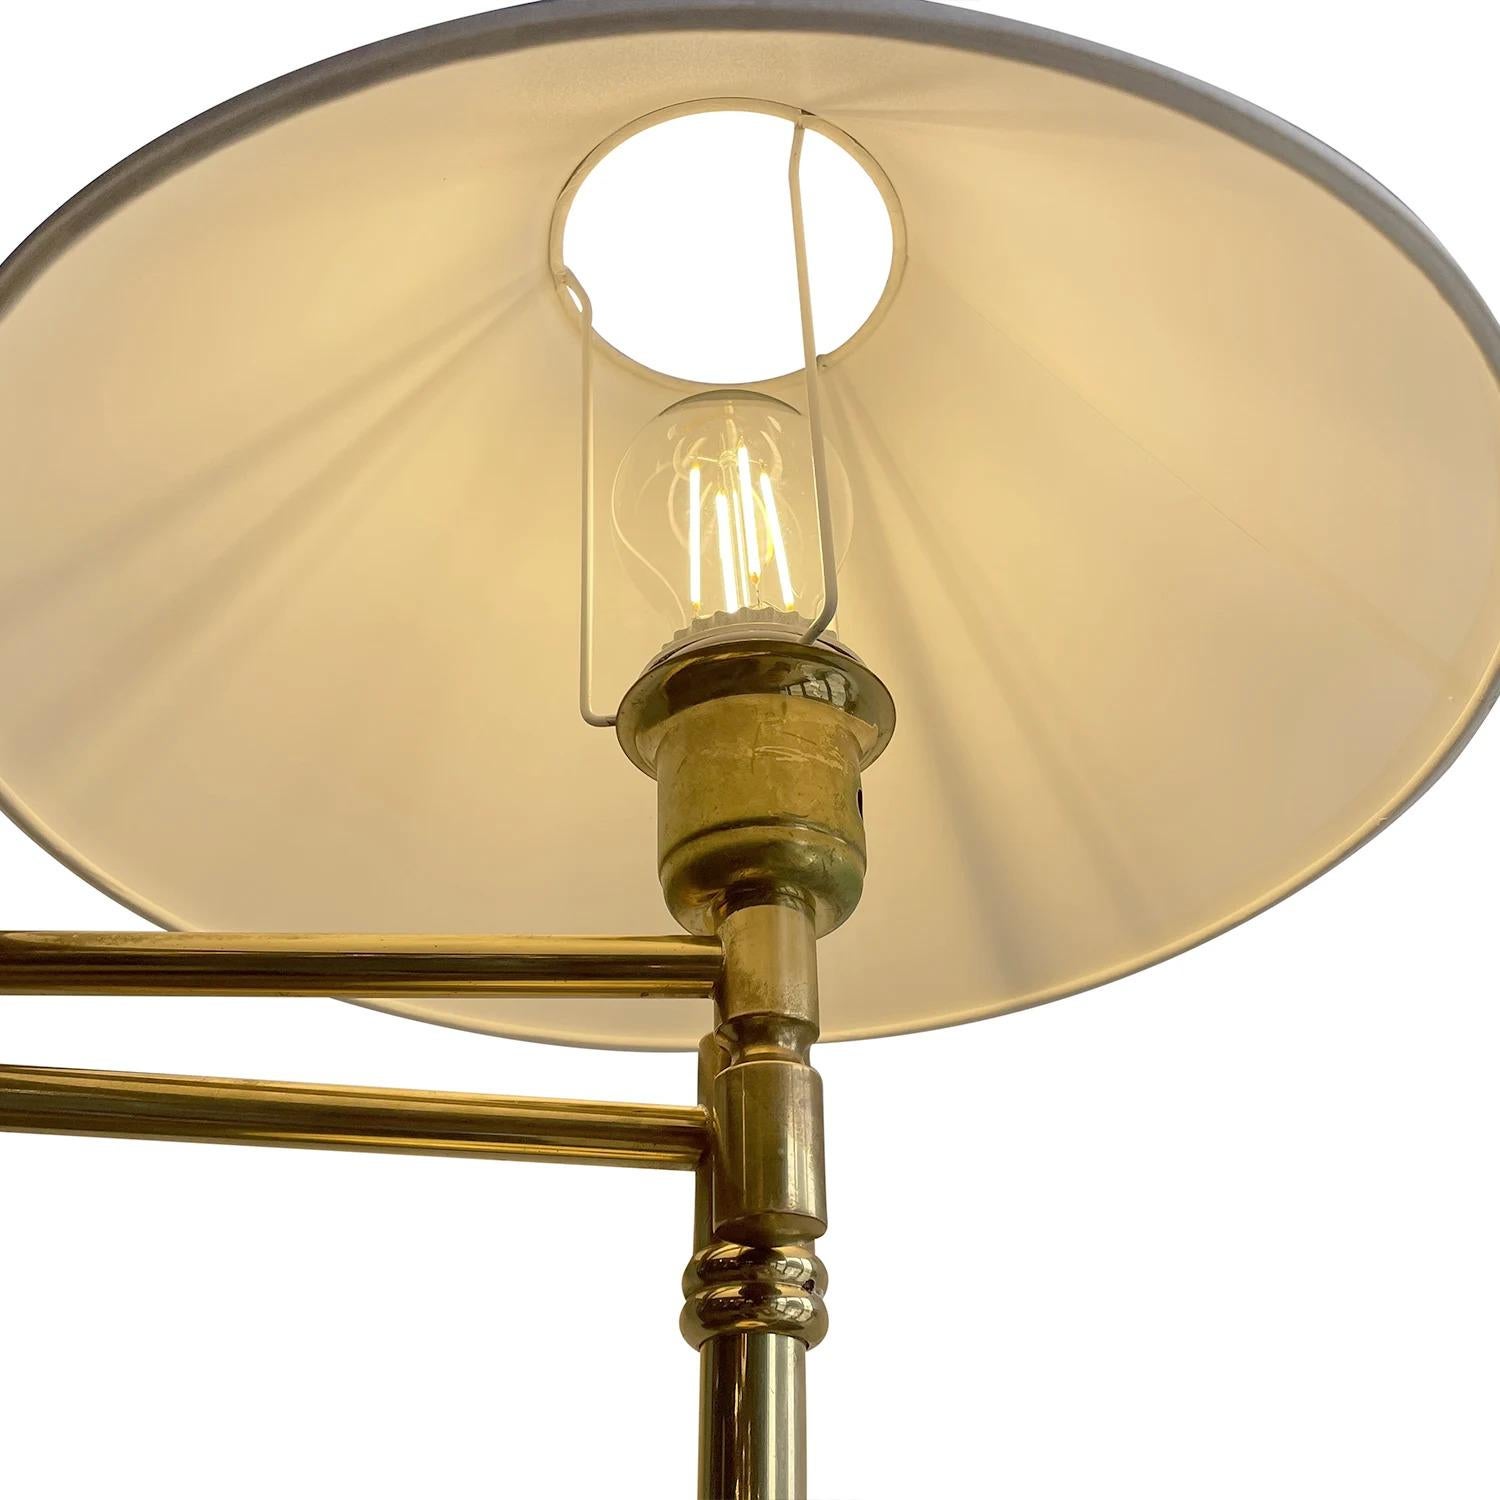 20th Century Swedish Pair of Polished Brass Reading Table Lamps by EWÅ, Värnamo For Sale 2